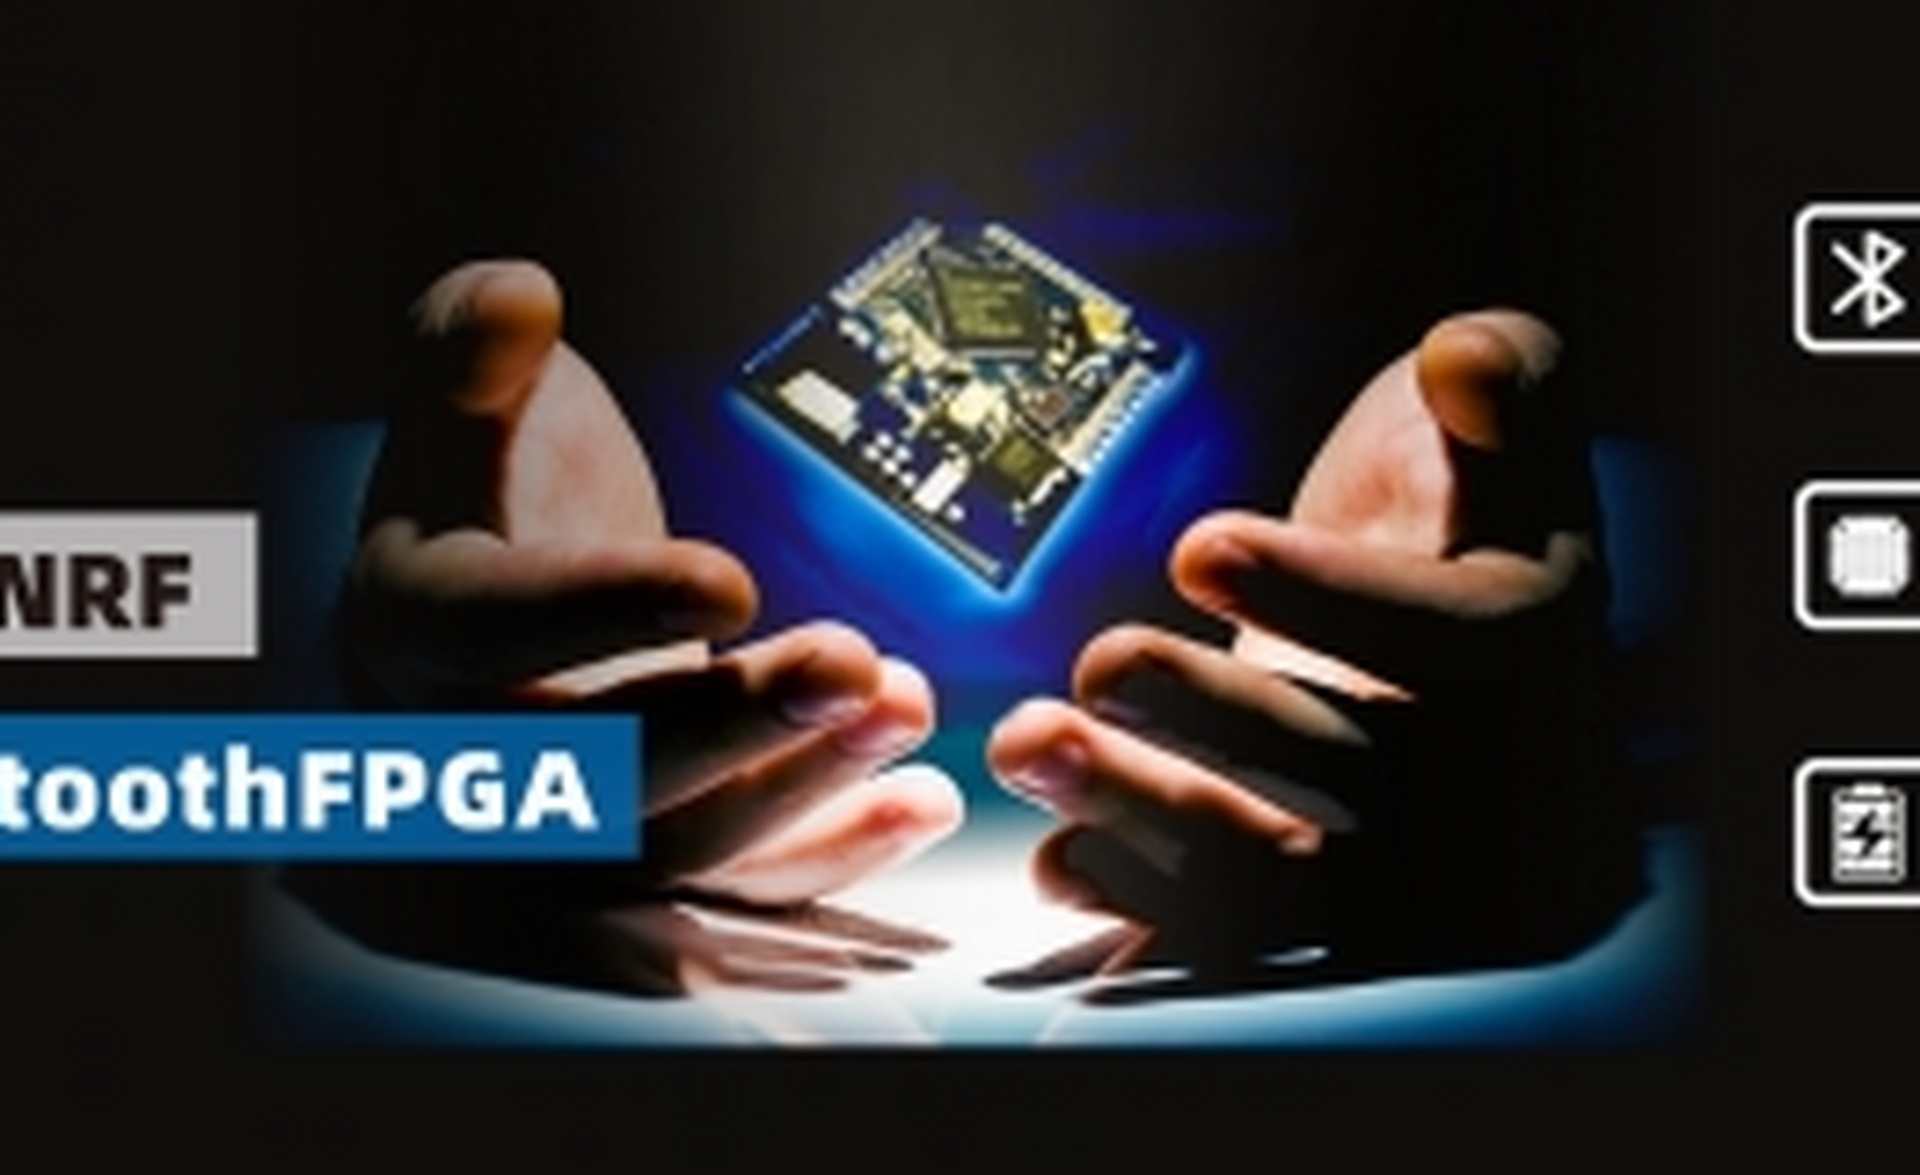 Gowin series of Bluetooth FPGA Products